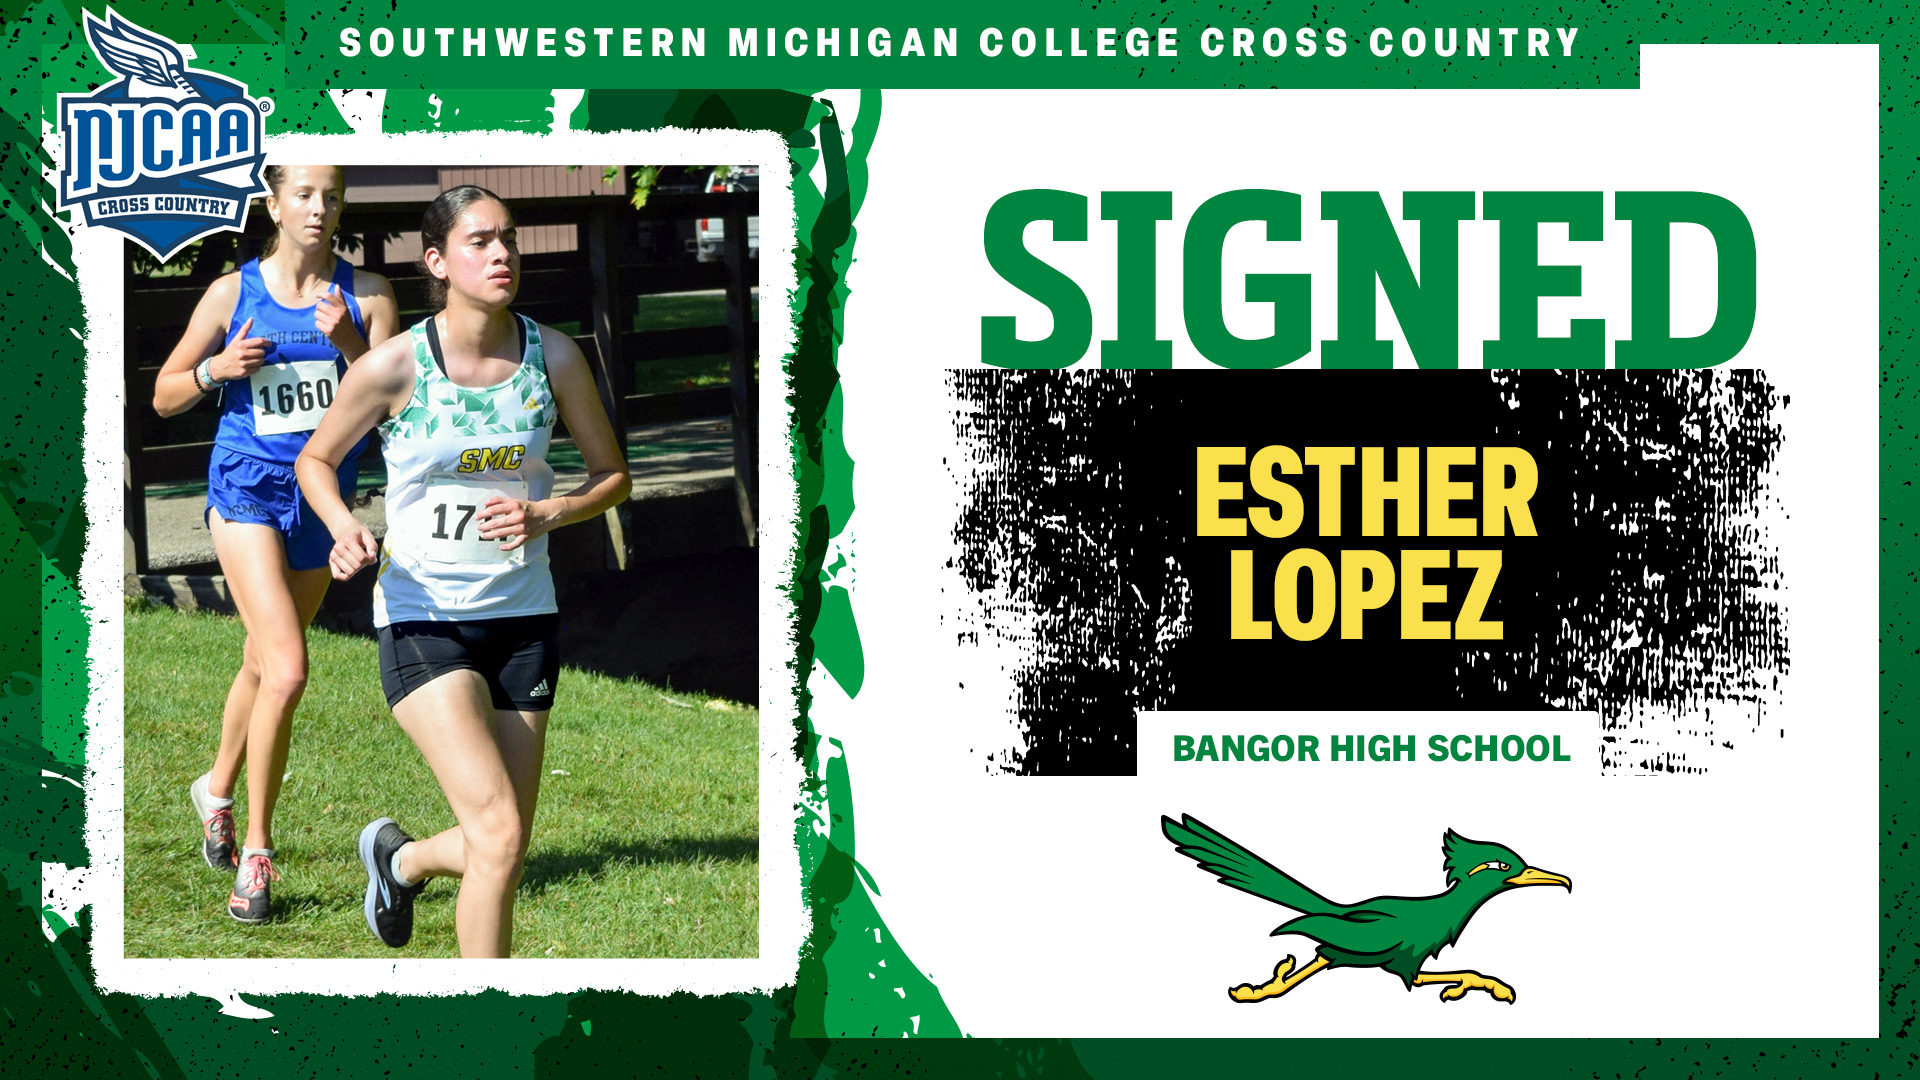 Esther Lopez Earns Scholarship for SMC Women’s Cross Country